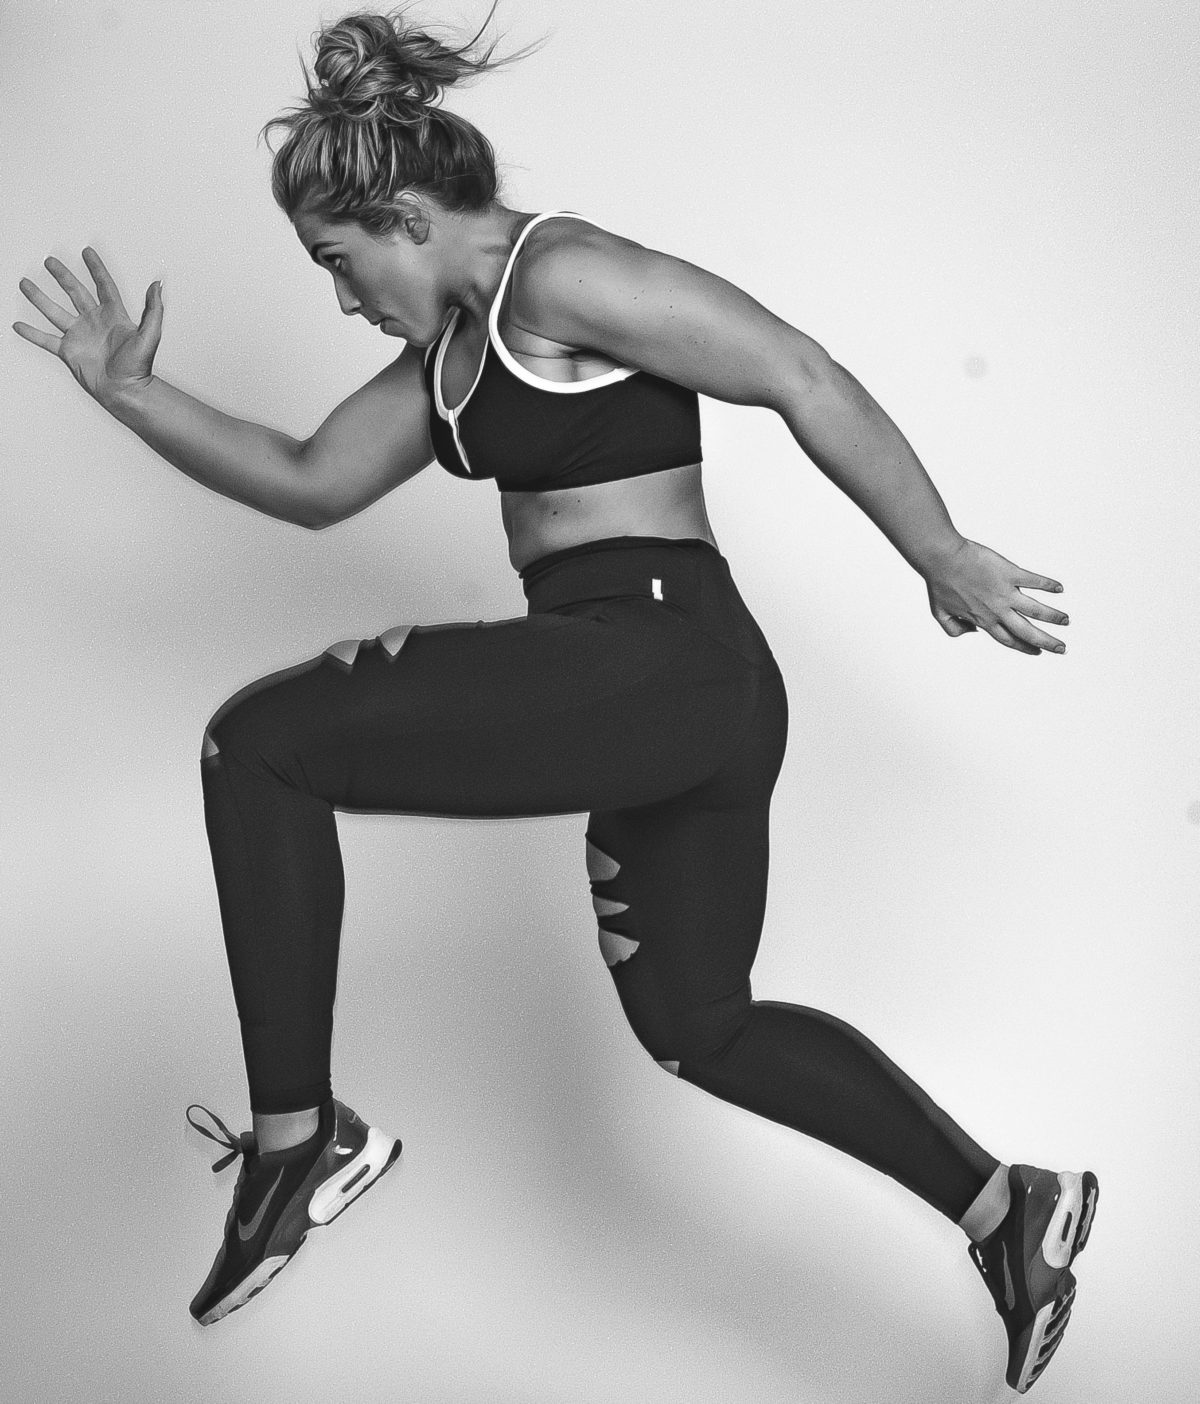 woman makes a good athlete wearing tights sneakers and sports bra in a running pose with hair in messy bun